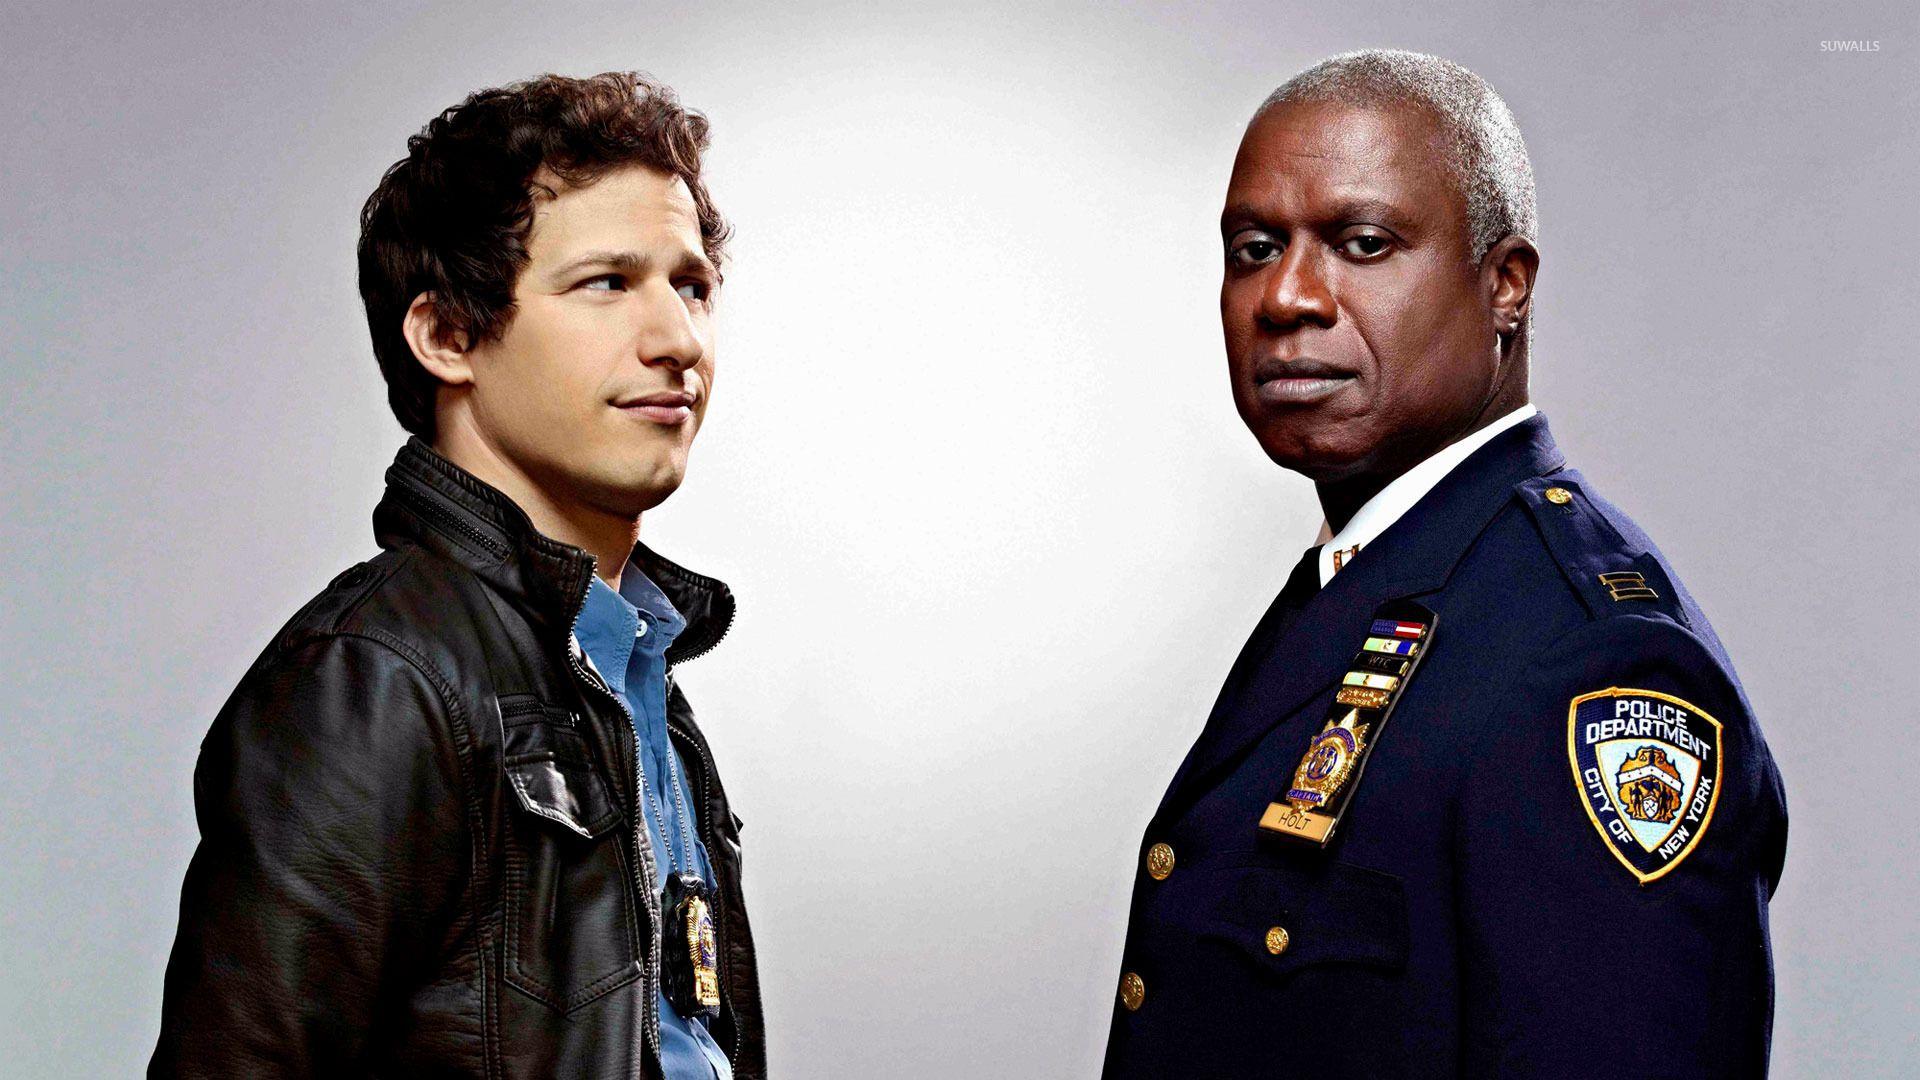 Capt Holt and Jake Peralta